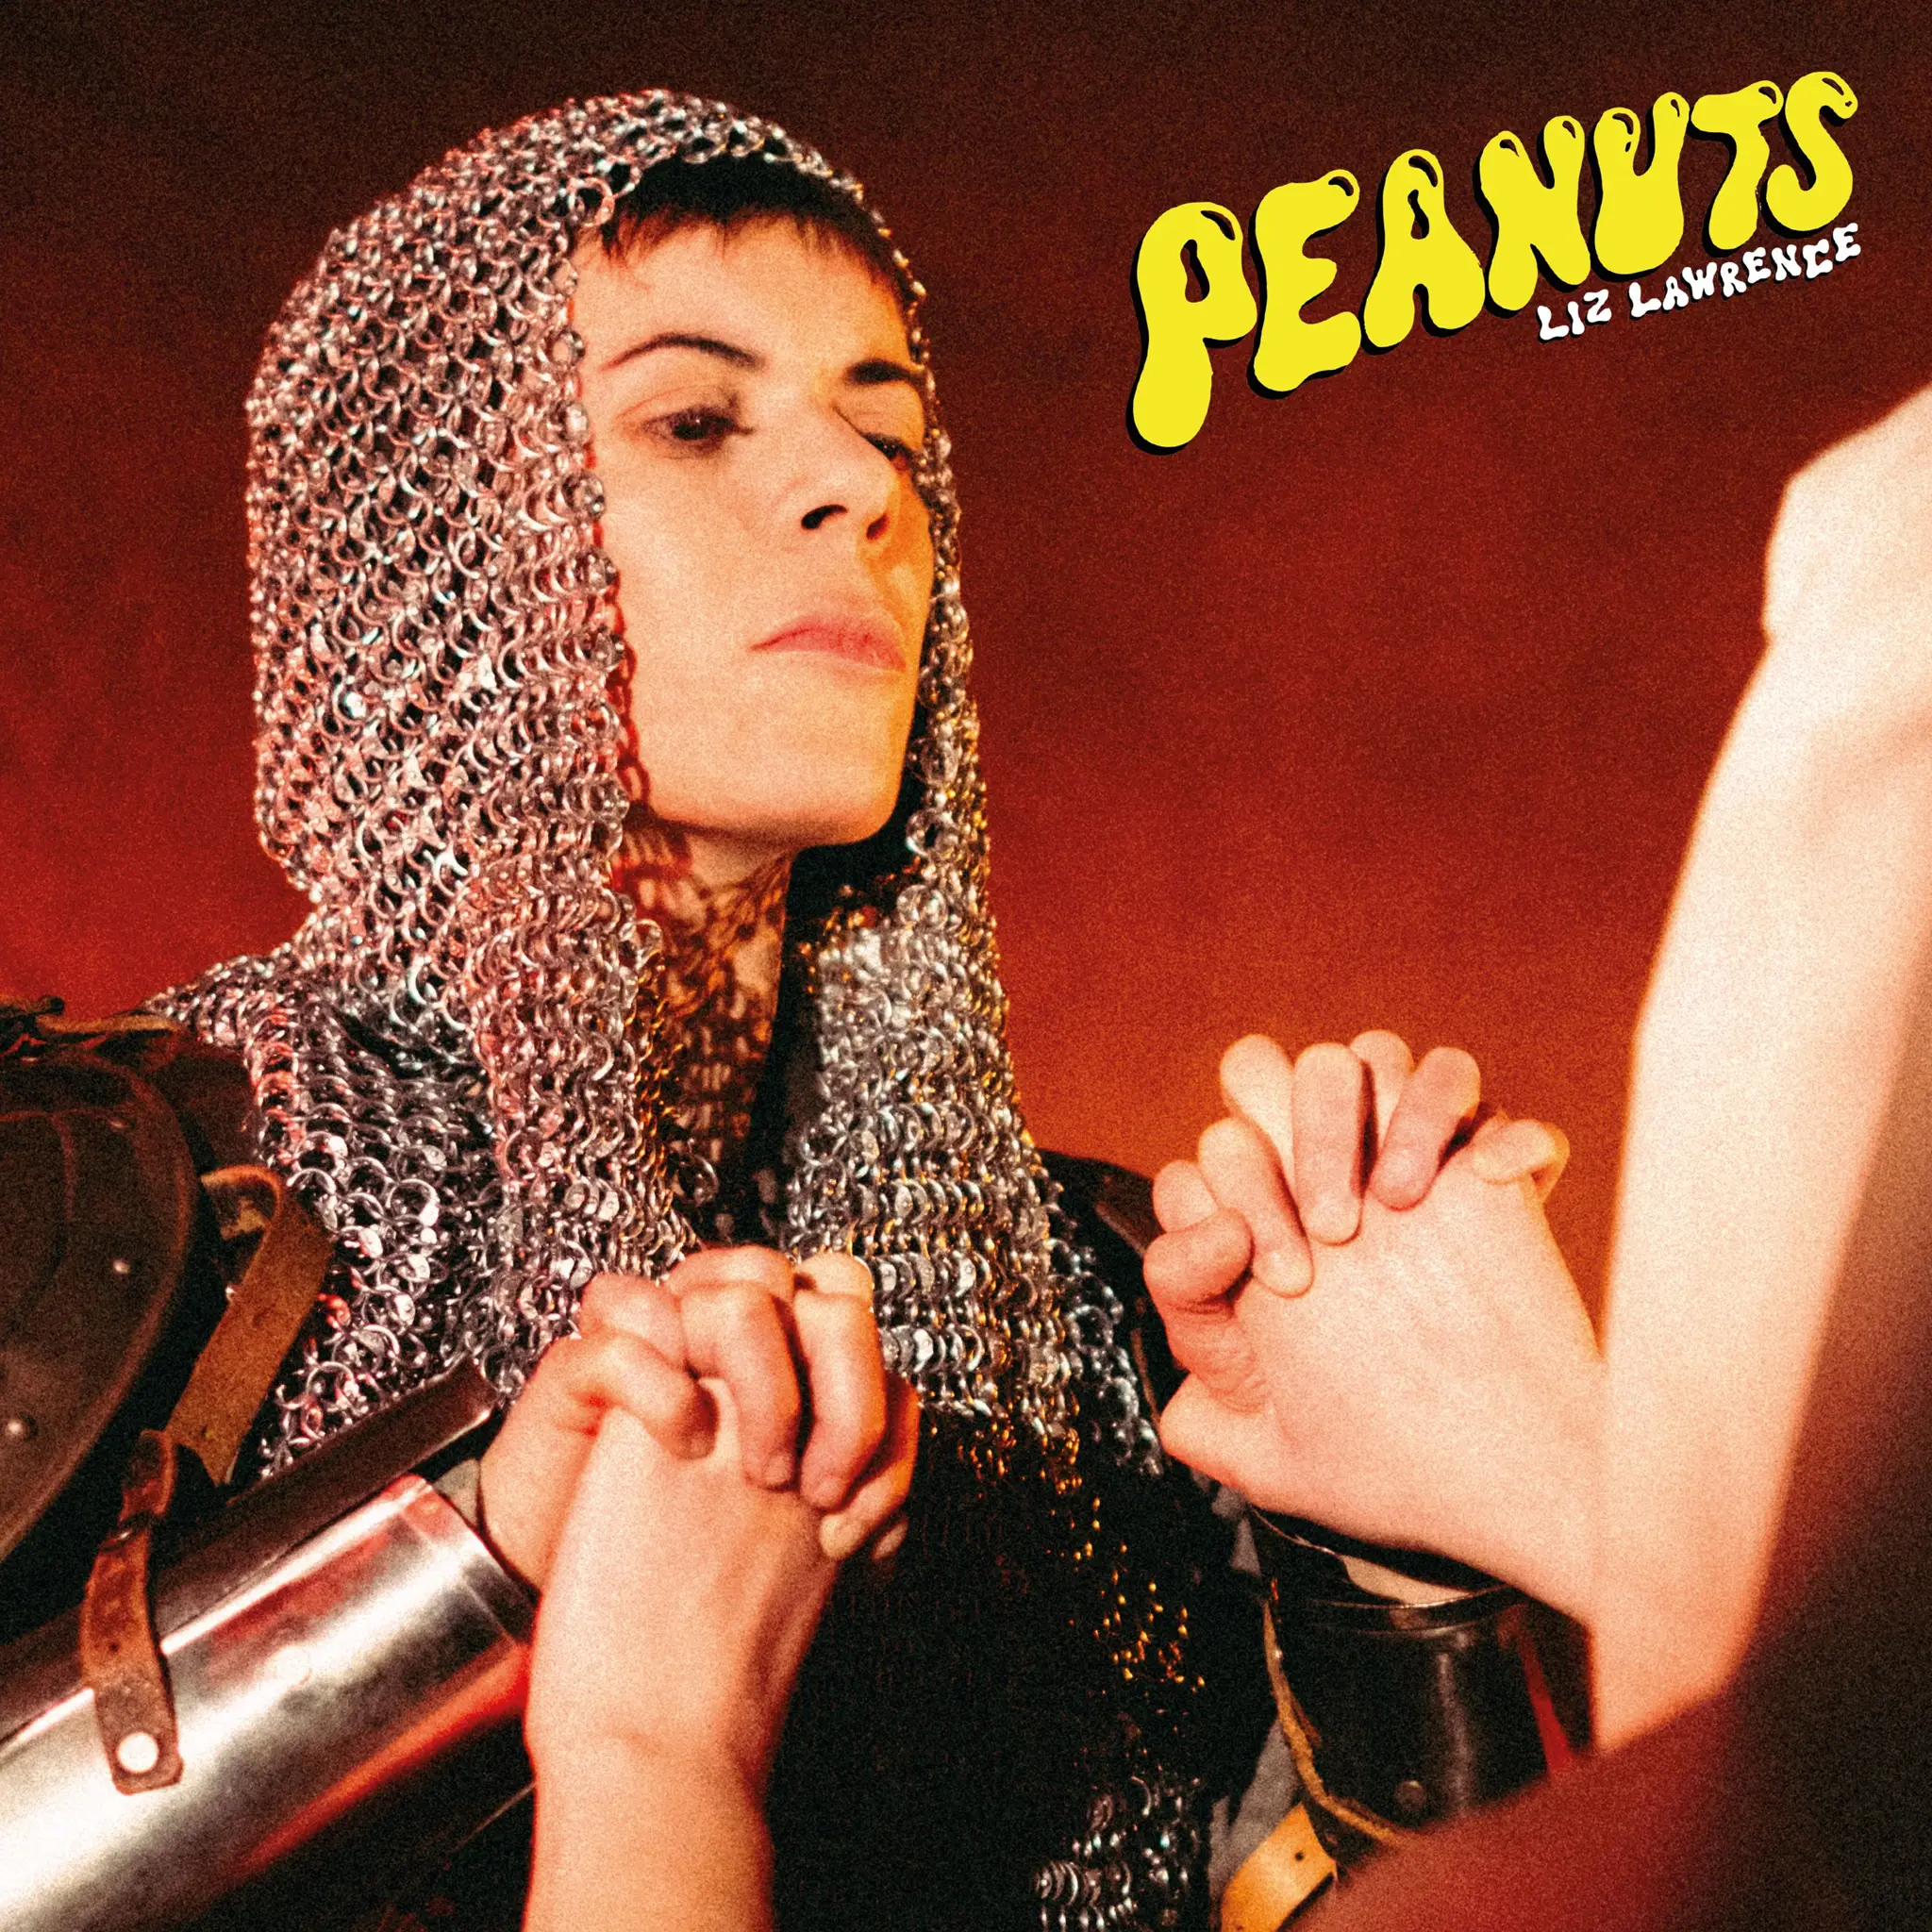 <strong>Liz Lawrence - Peanuts</strong> (Vinyl LP - yellow)